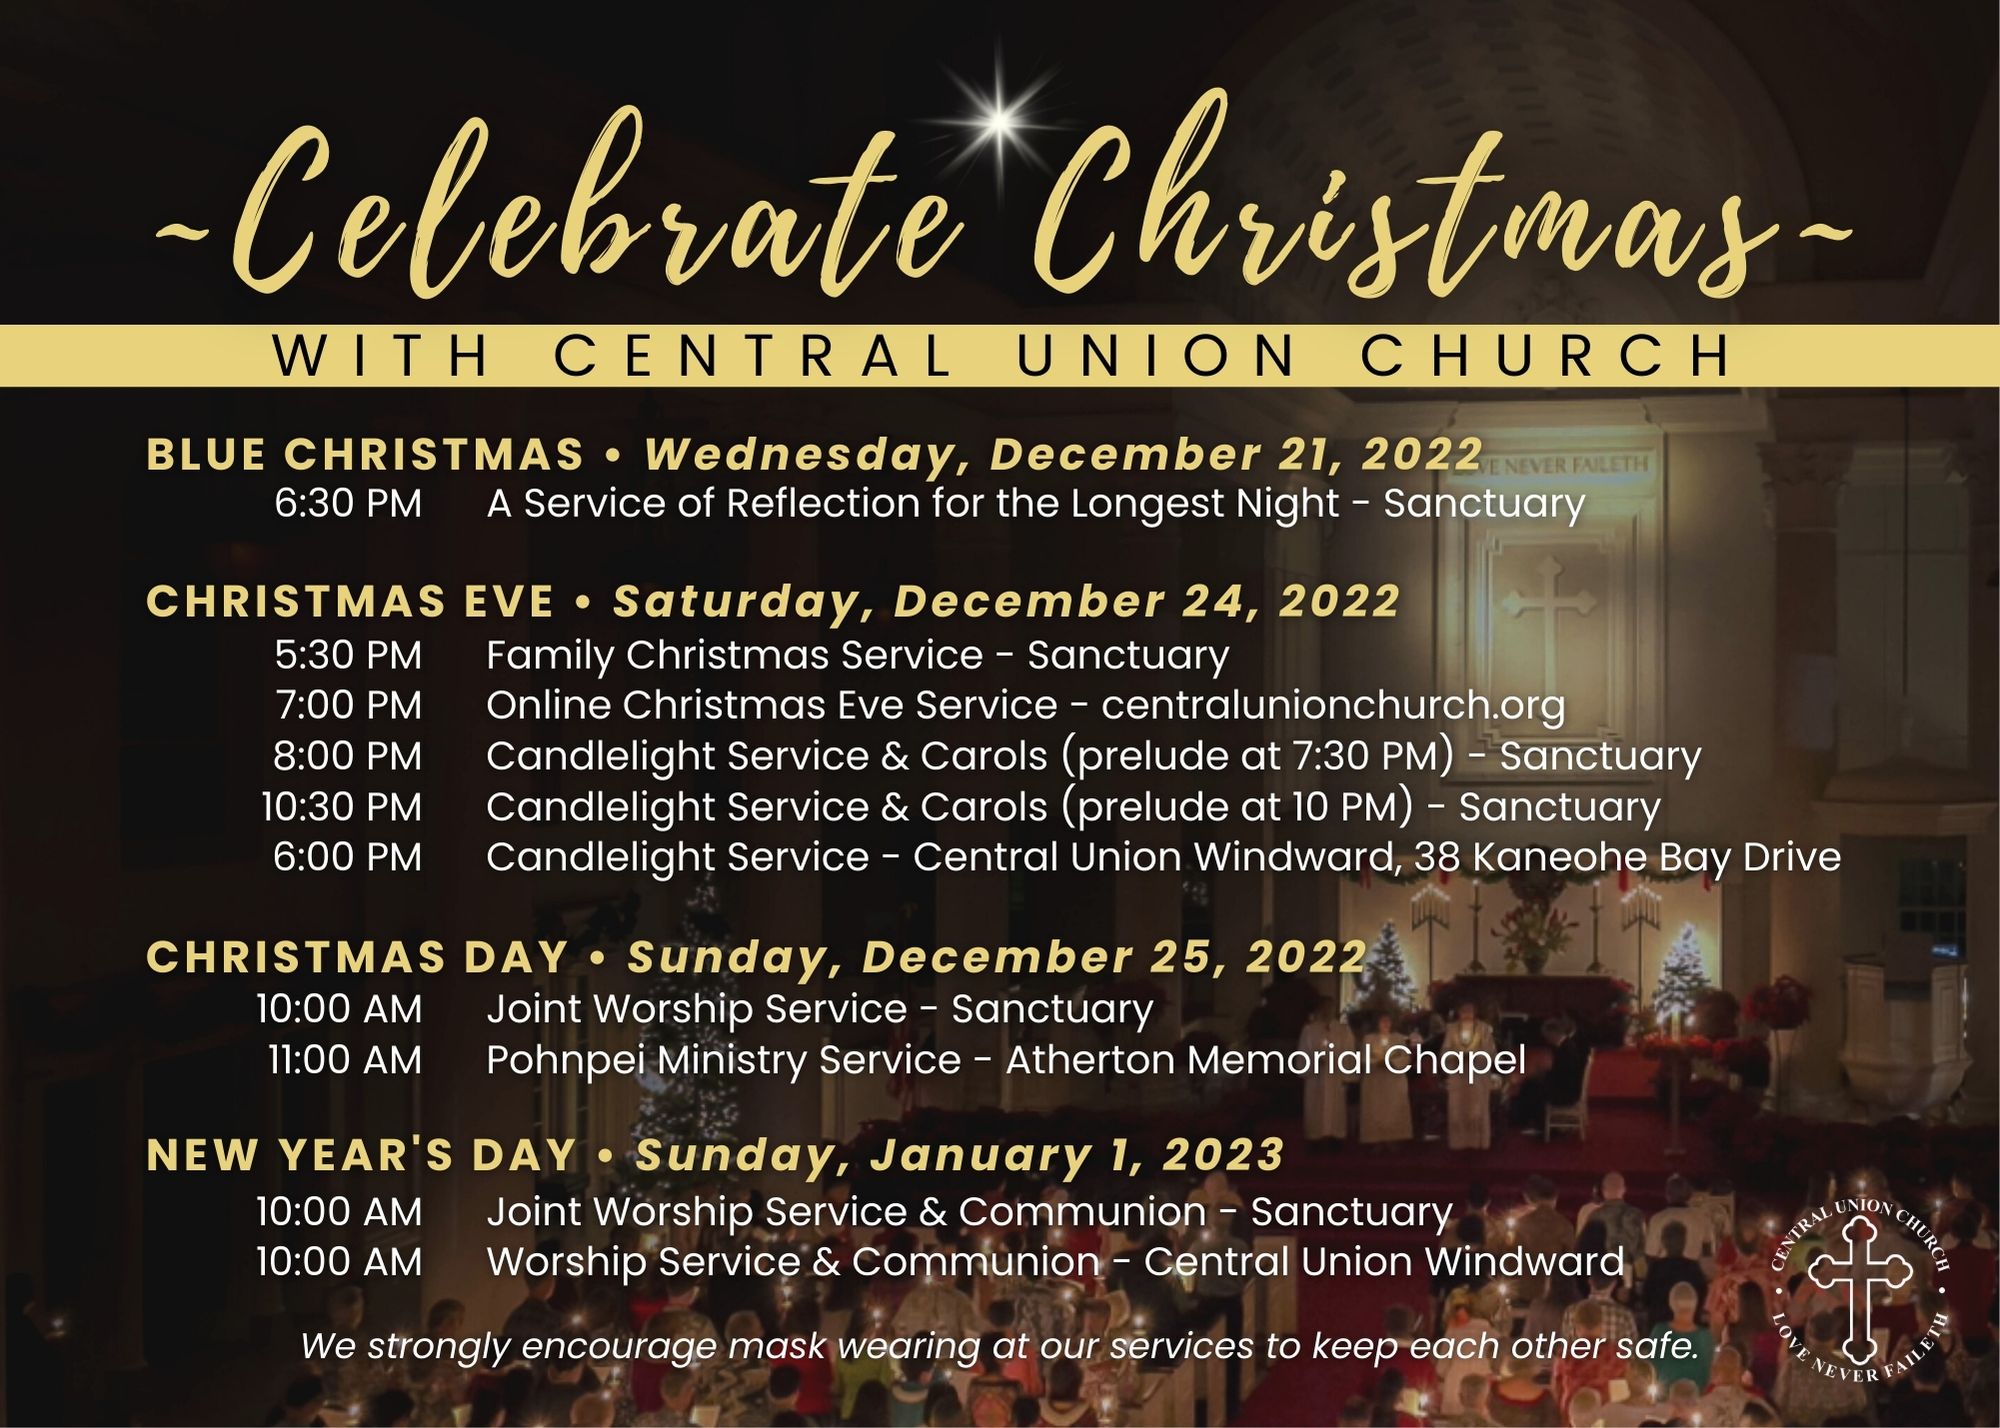 Schedule of Christmas services at Central Union Church for 2022